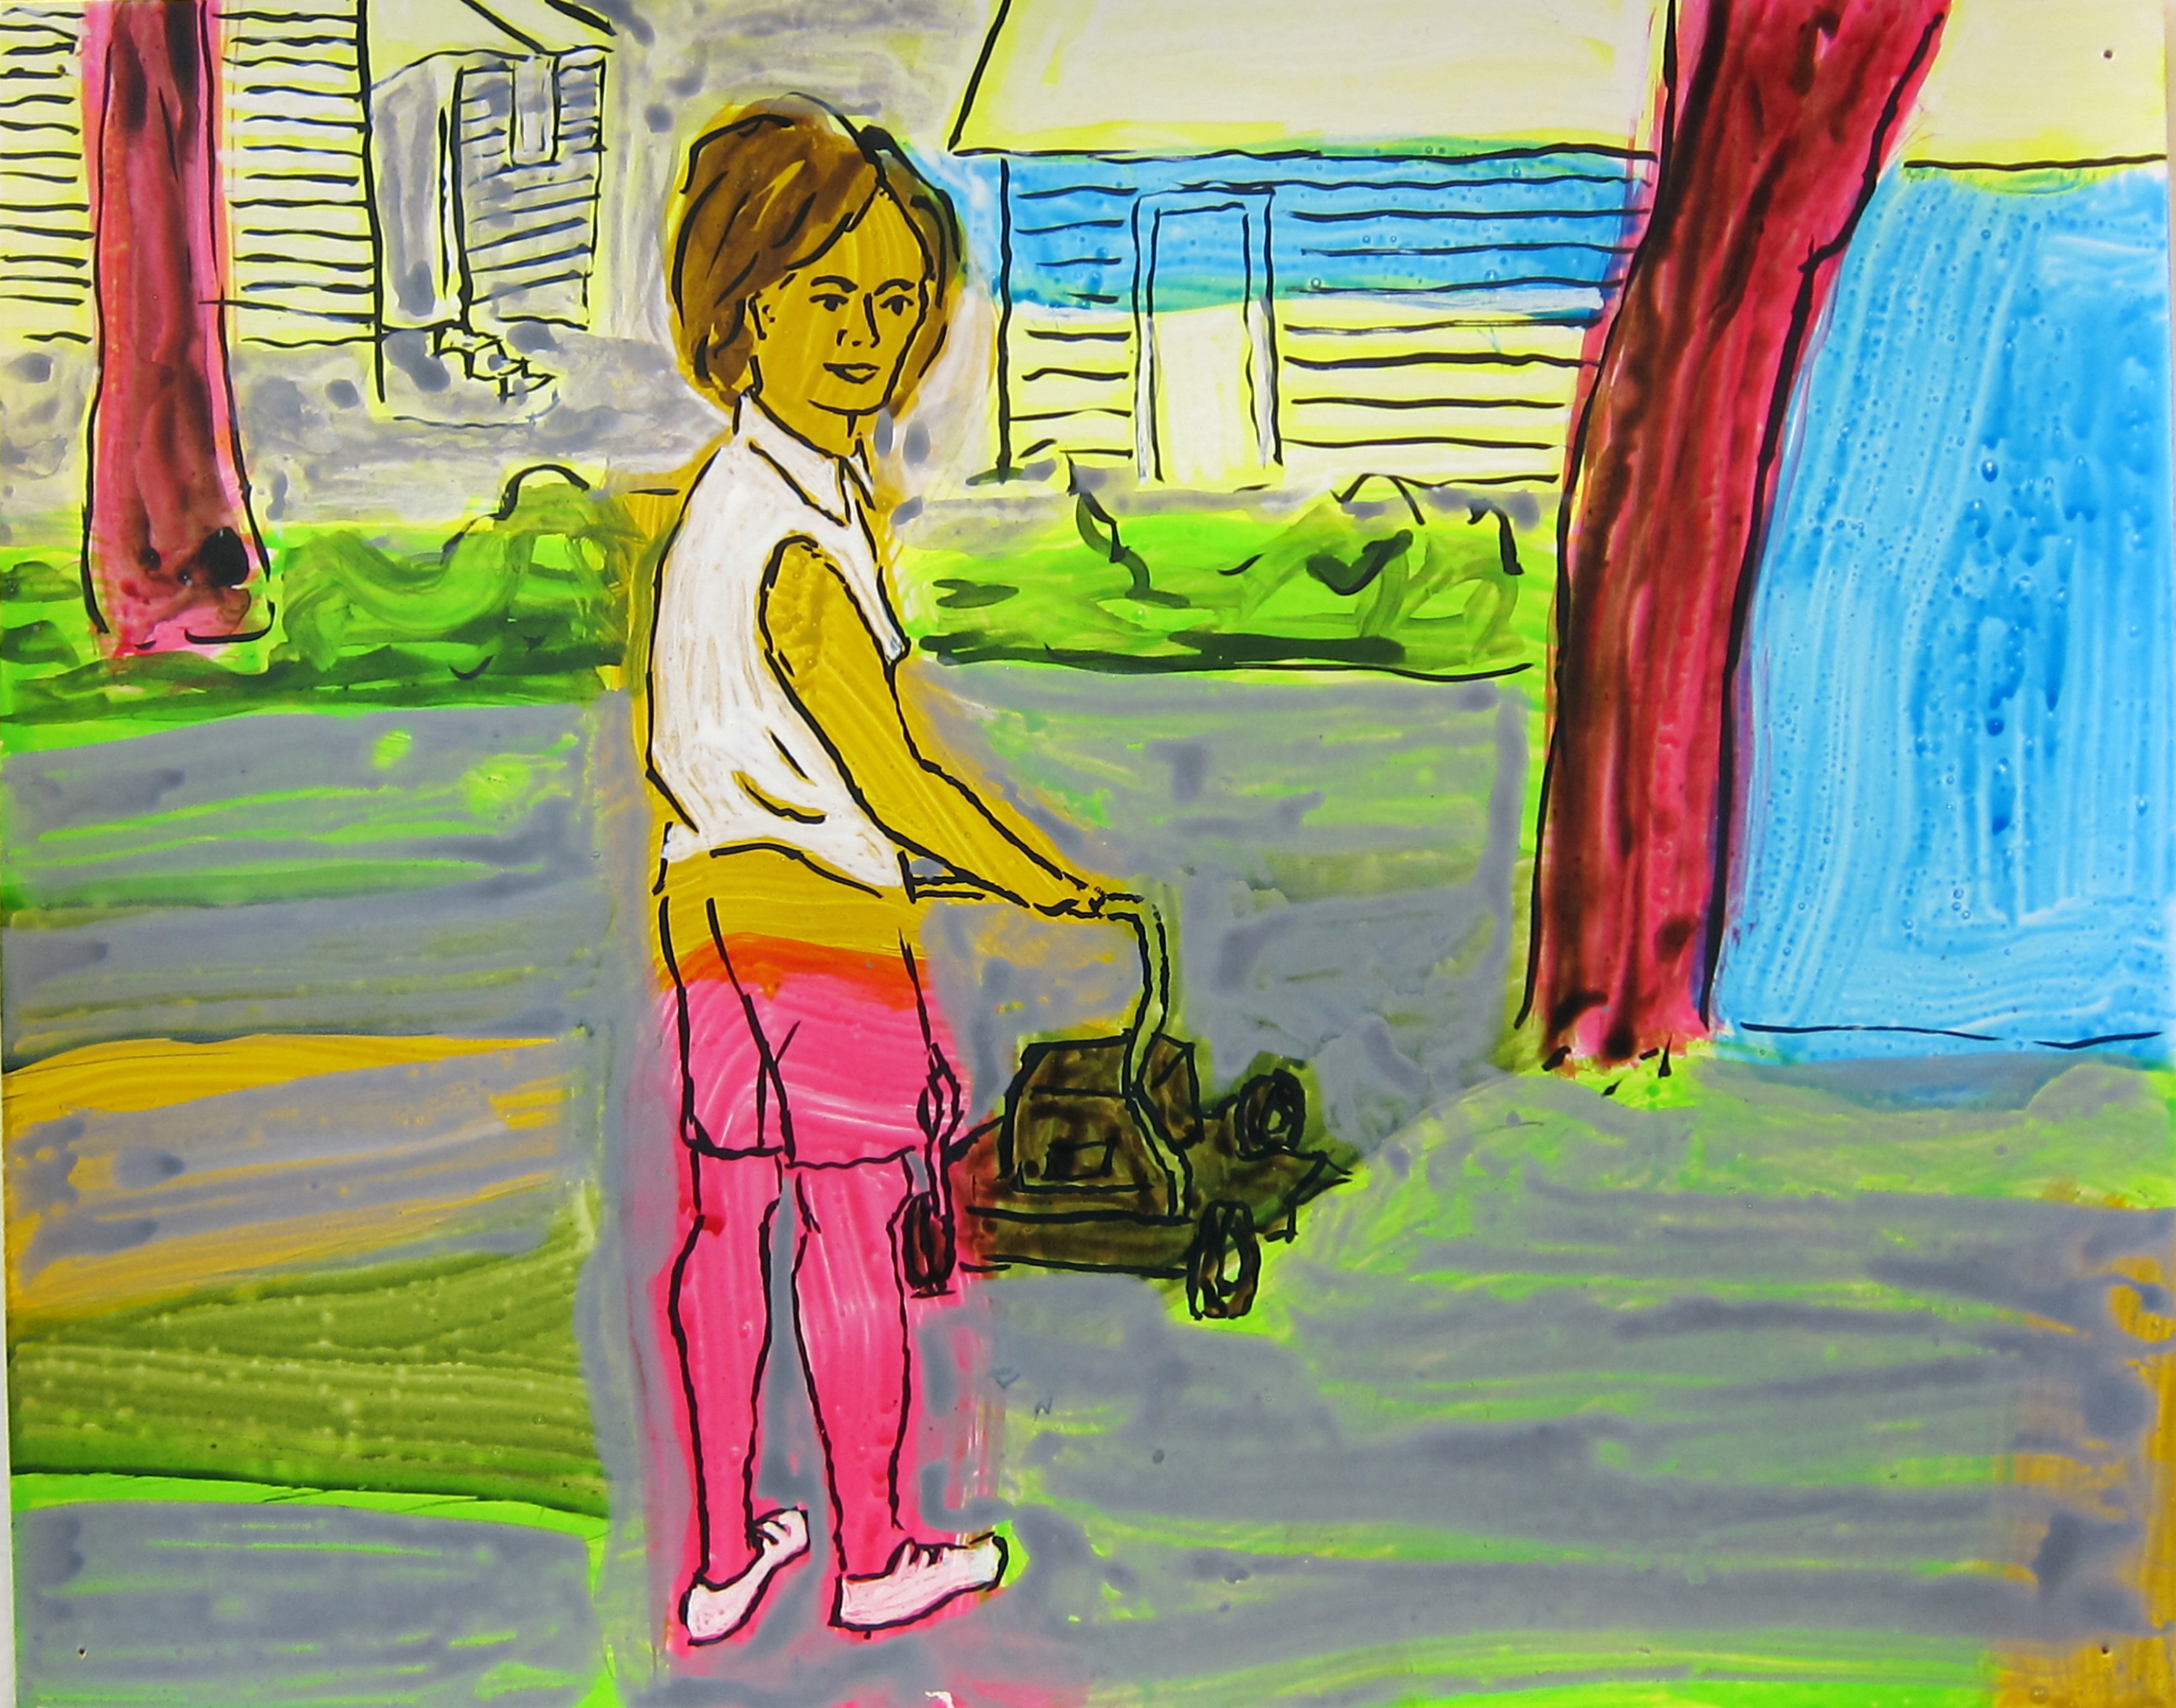   Woman Mowing Lawn , 2016  9.5"x12" ink on paper  PRIVATE COLLECTION 